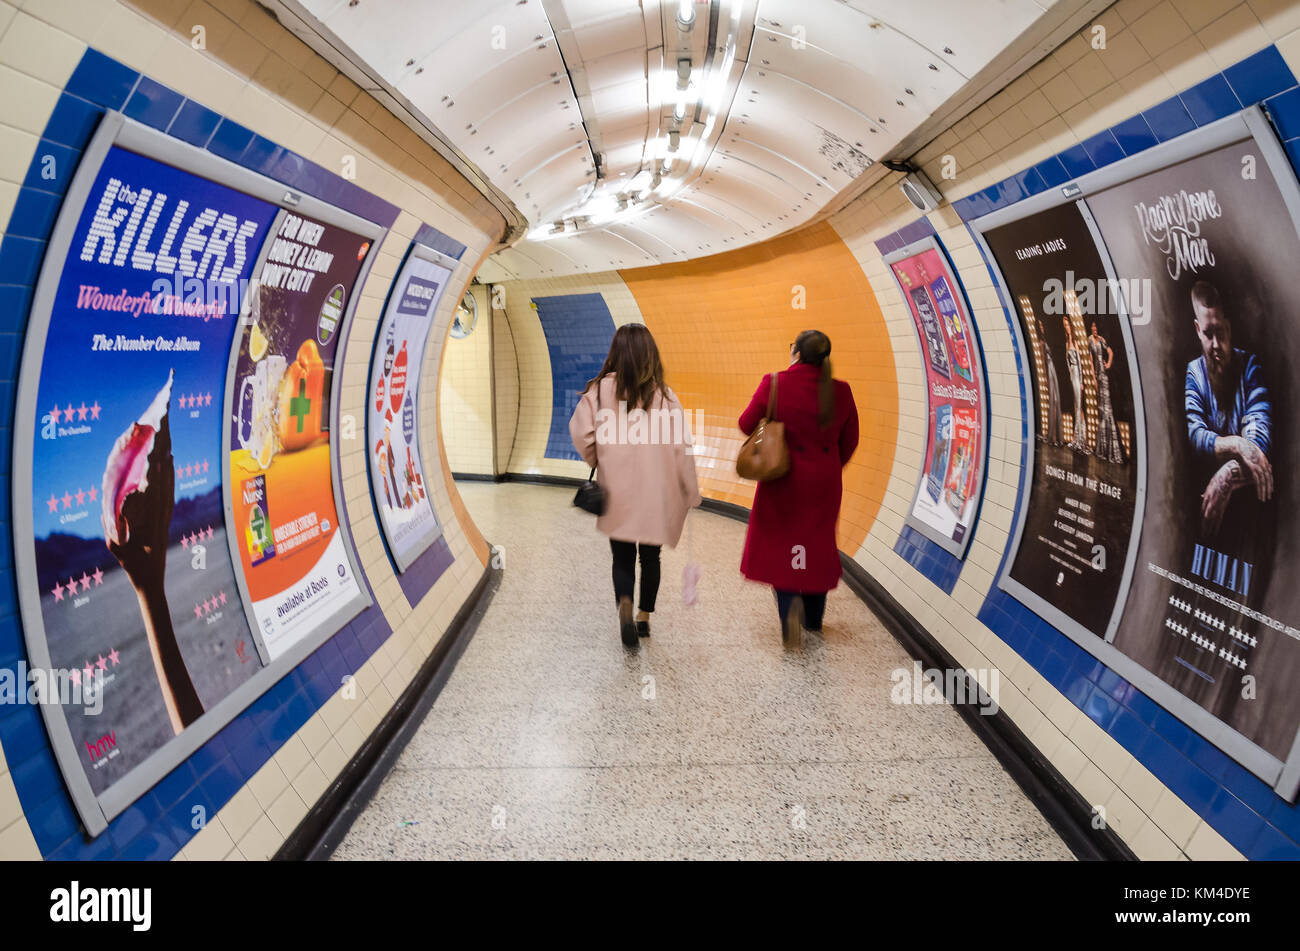 Two ladies walk through a connecting tunnel on the London Underground. The walls are covered with advertising posters. Stock Photo